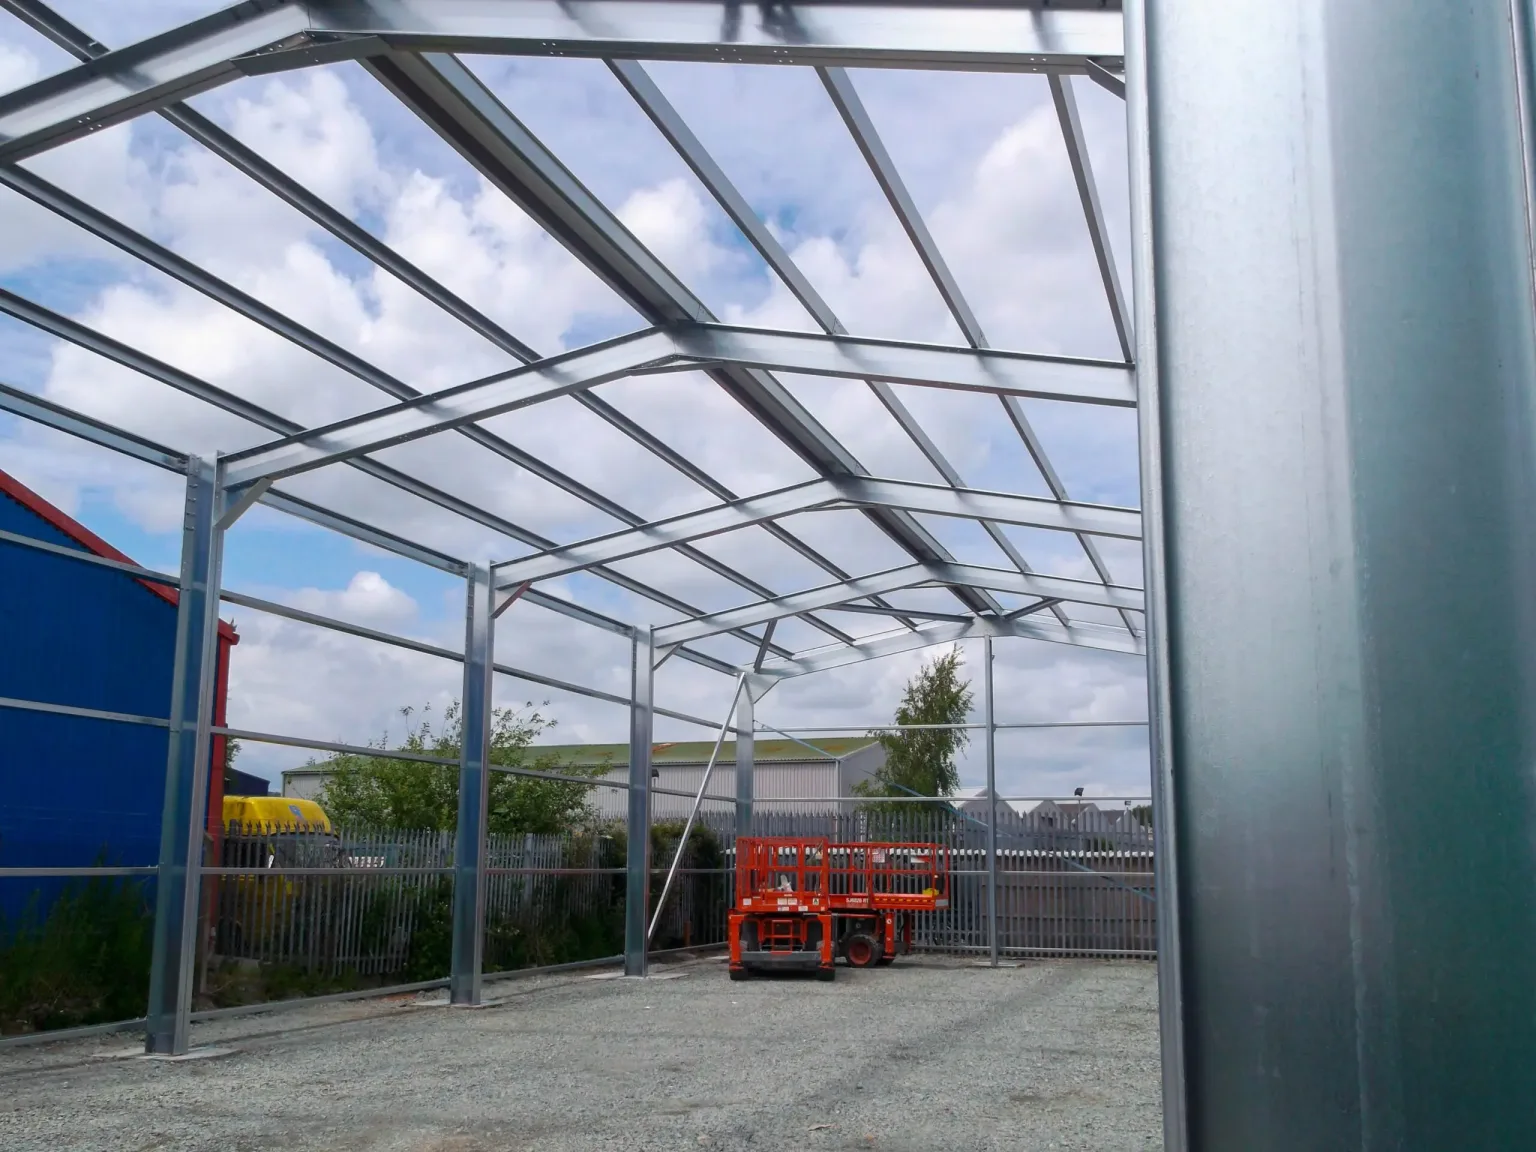 Construction of a Steel Framed Building being installed near Leeds by Springfield Steel Buildings. The next phase would be the installation of the Kingspan roof and wall cladding.